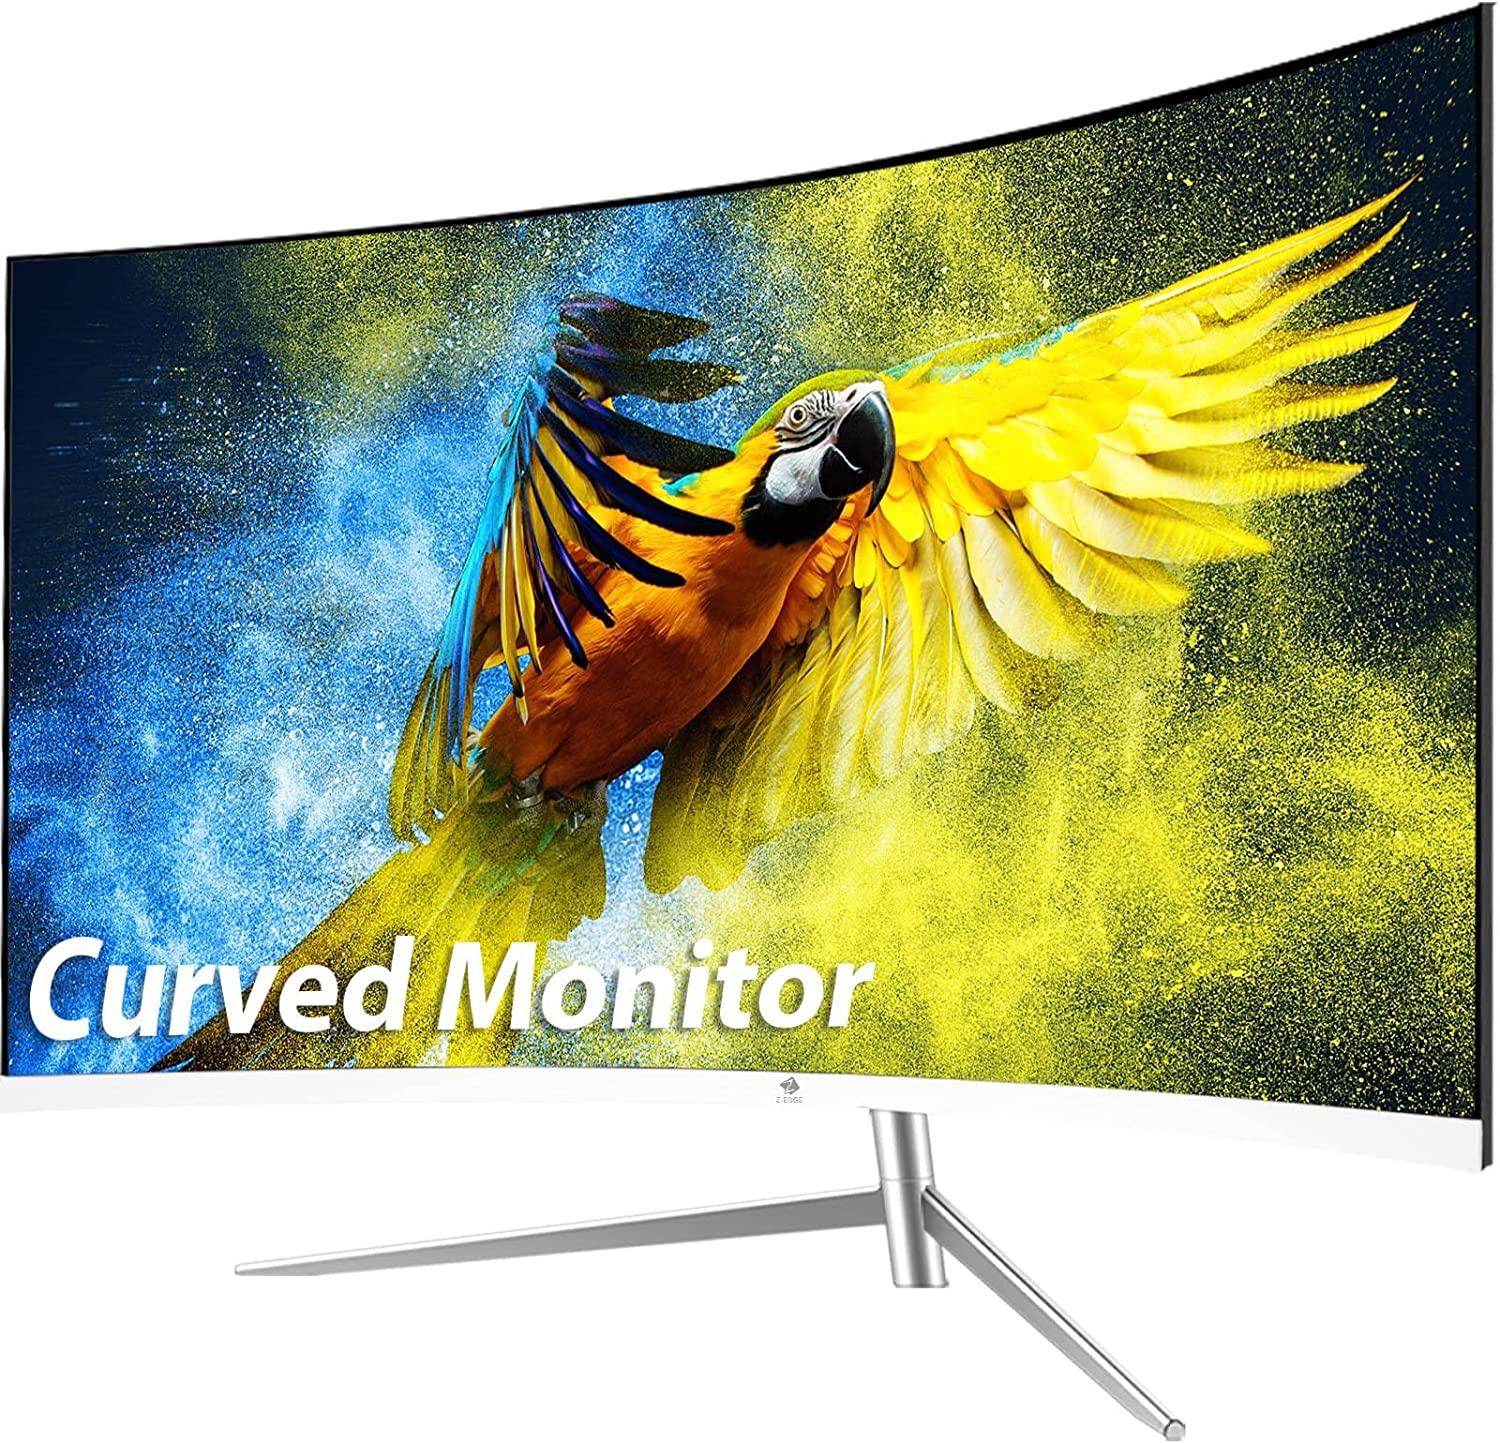 27 tv monitor review